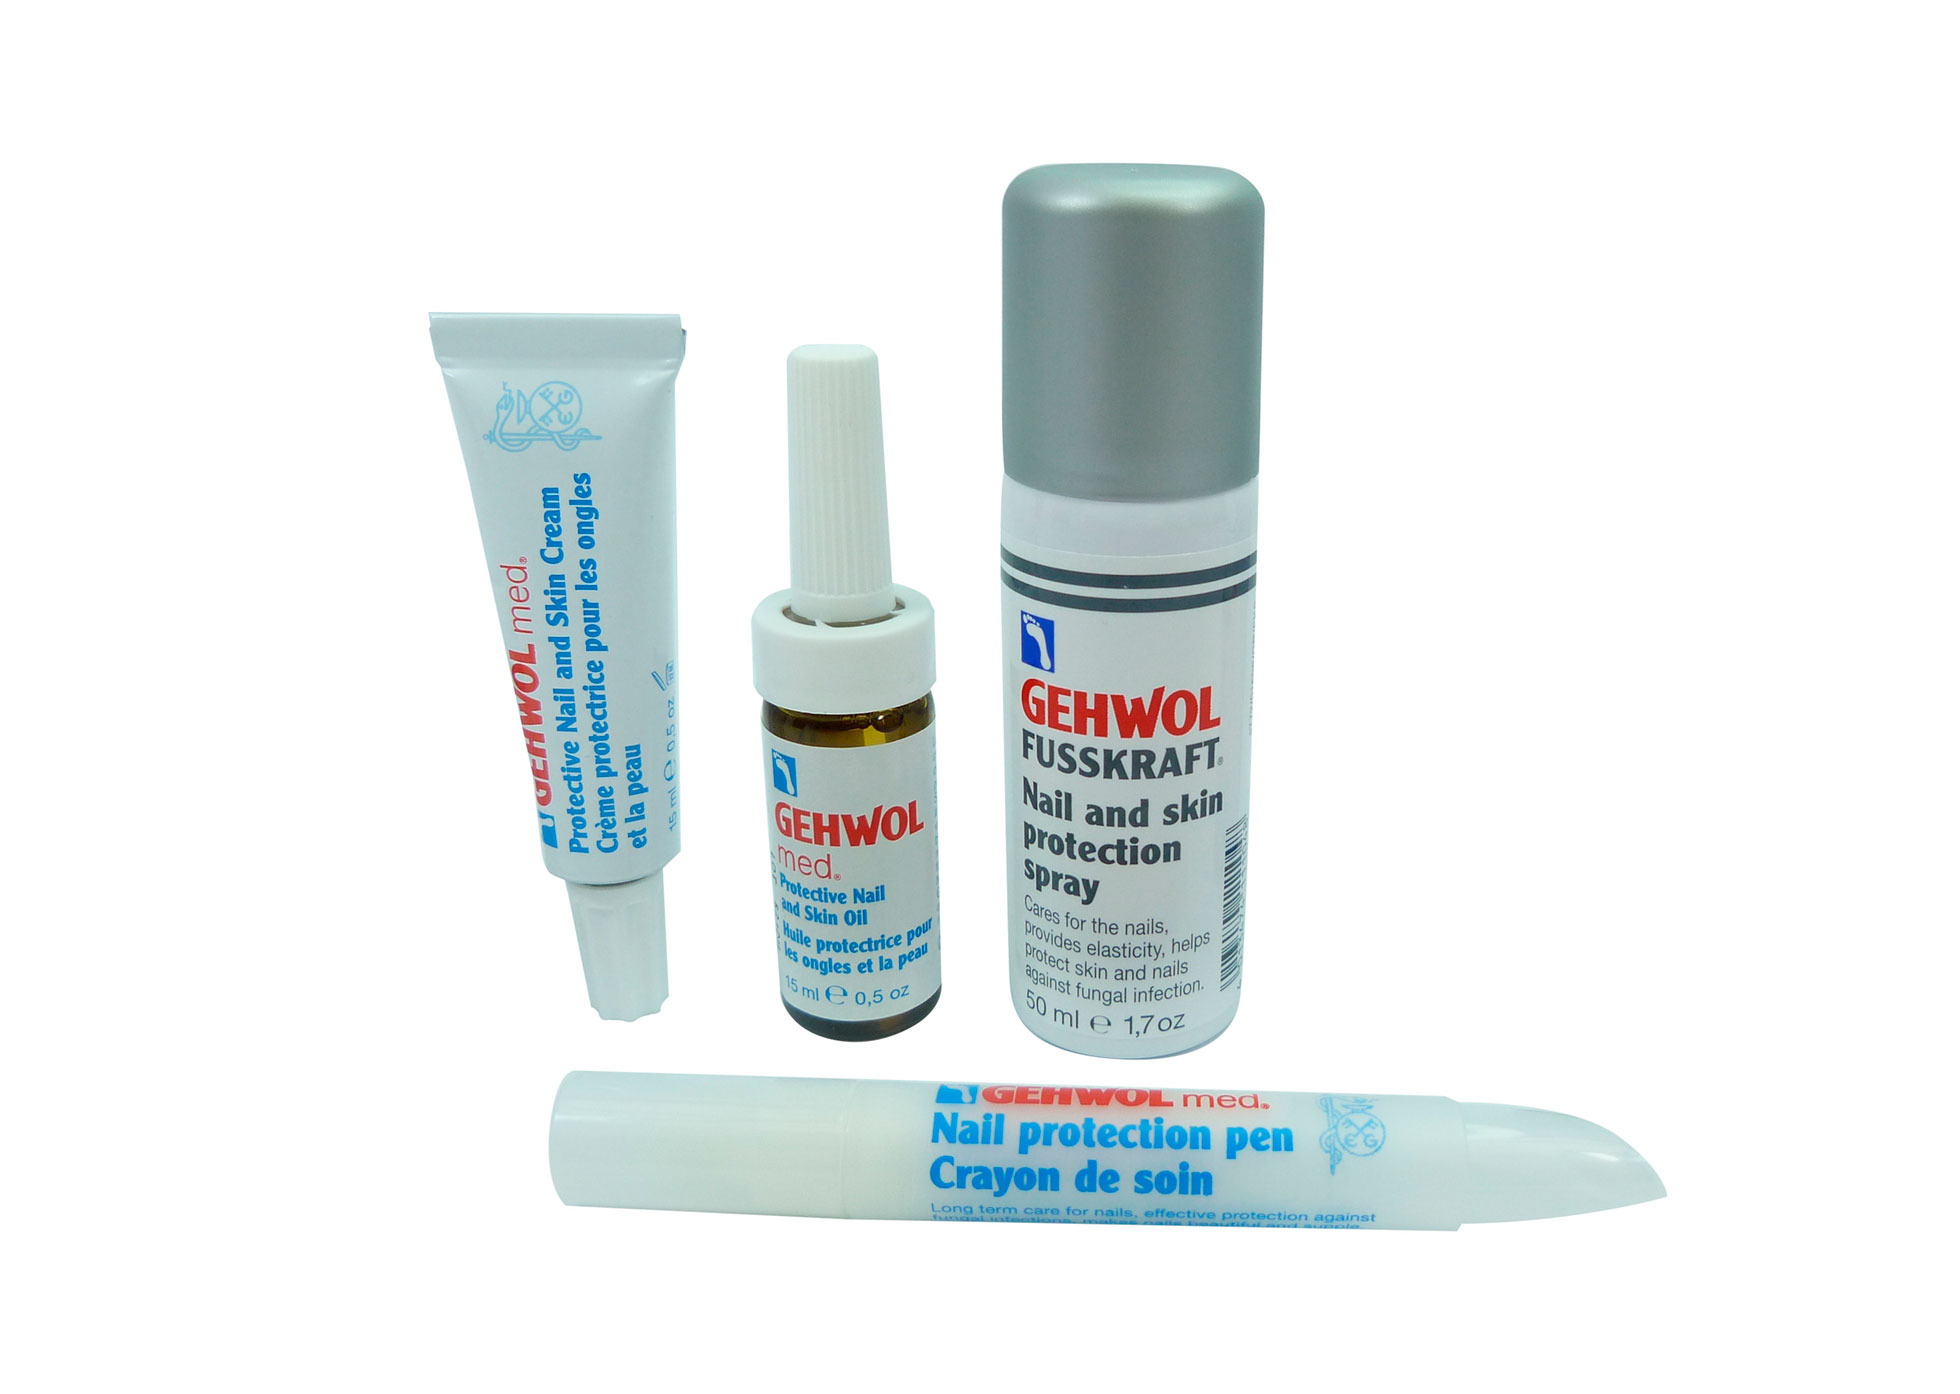 9. Gehwol Med Nail and Skin Protection - 15ml Cream